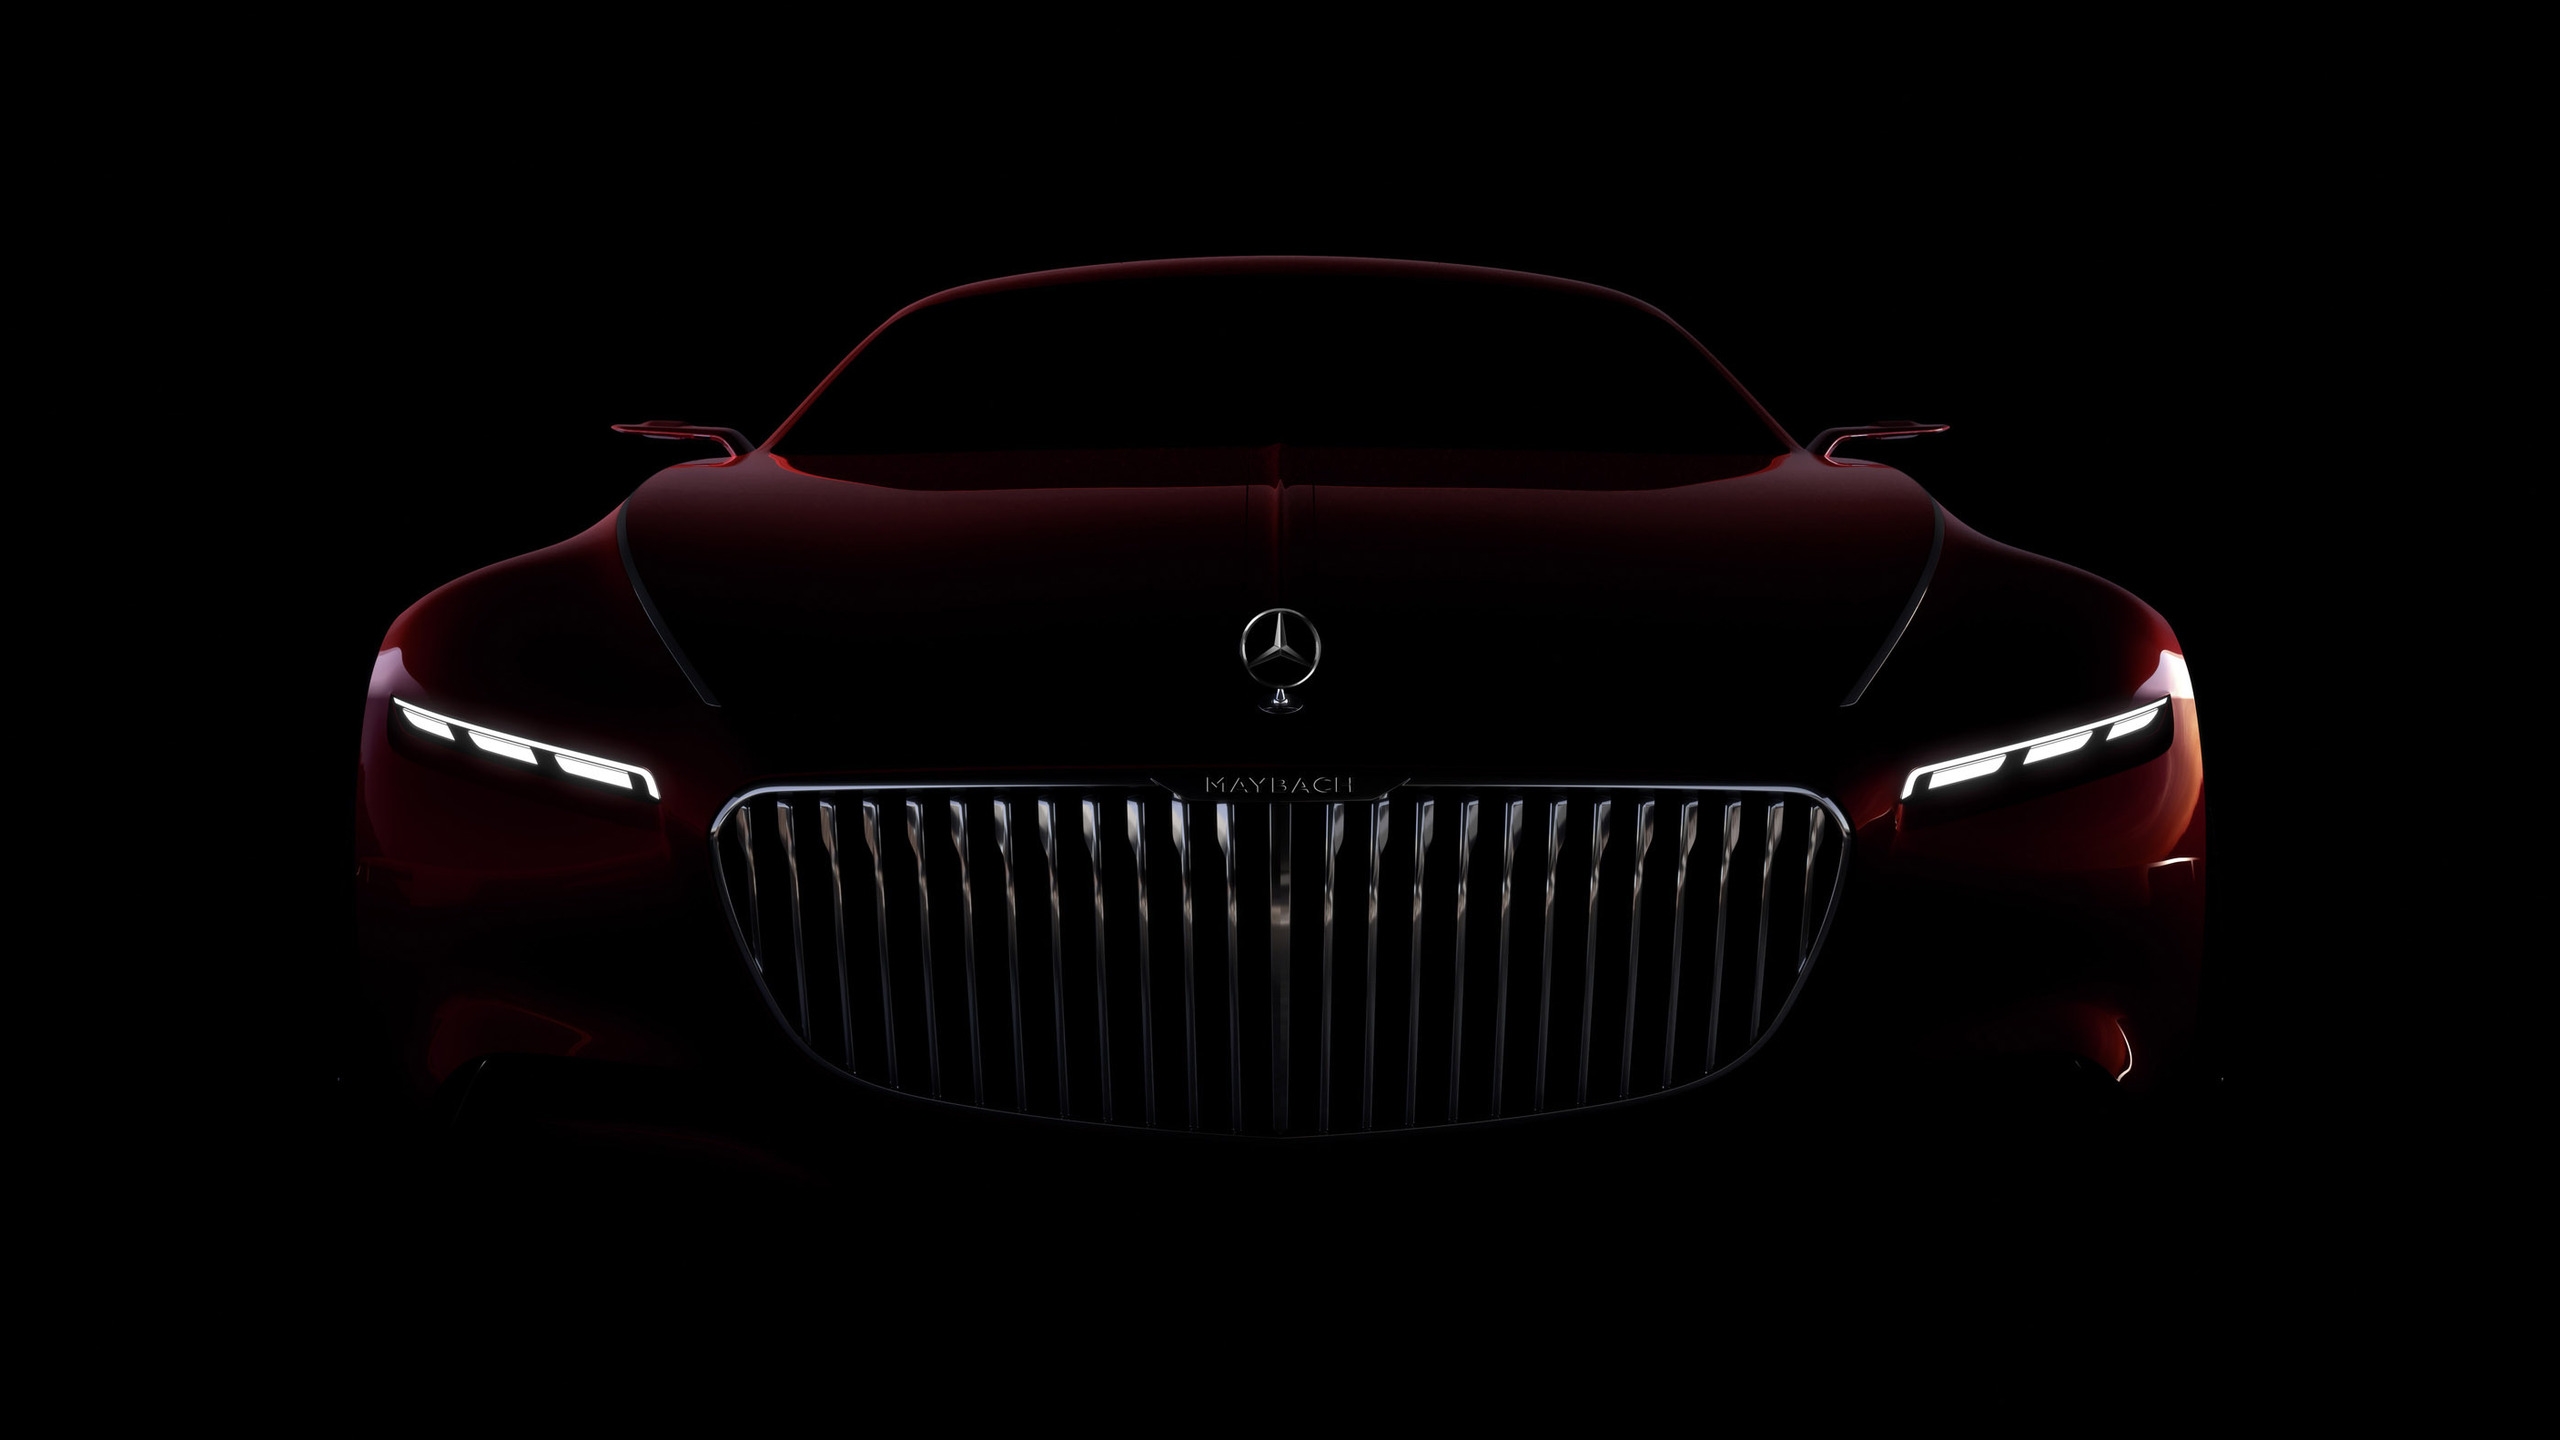 Amazing Vision Mercedes Maybach 6 2016 for 2560x1440 HDTV resolution